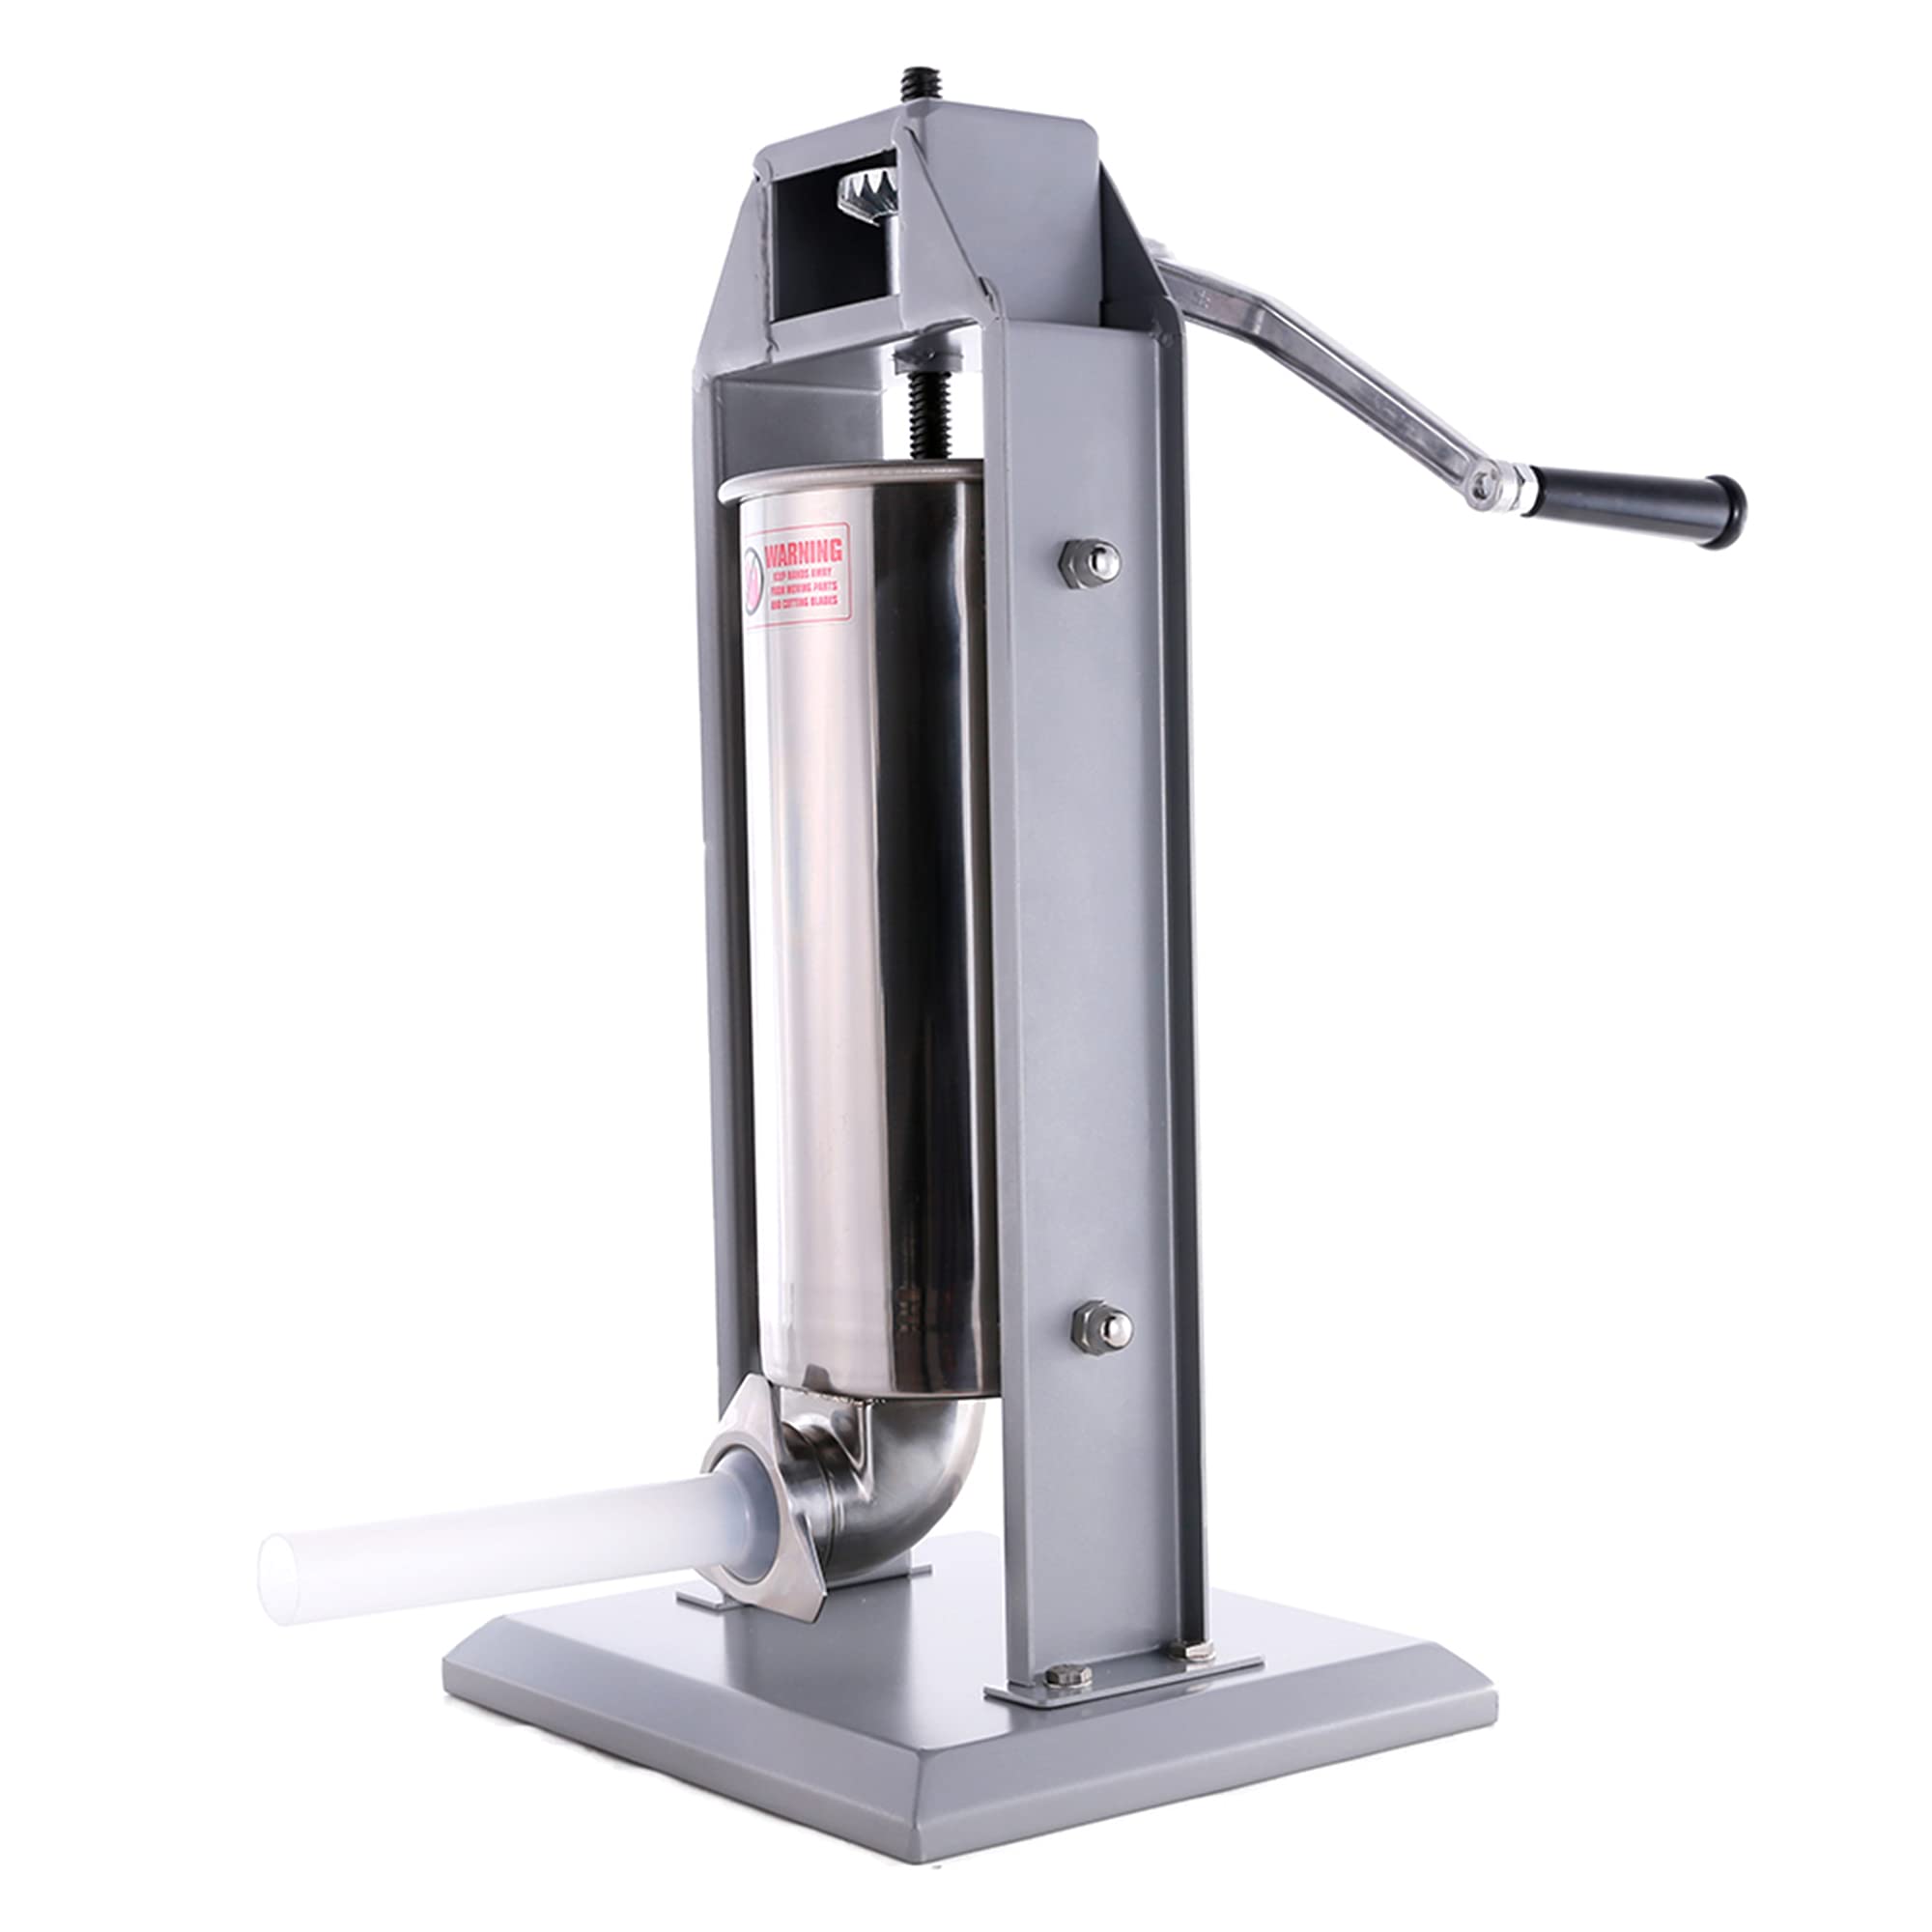 Commercial 25 lbs. / 12 L Stainless Steel Dual Speed Vertical Sausage Stuffer Meat Filler with 4-Stuffing Tubes